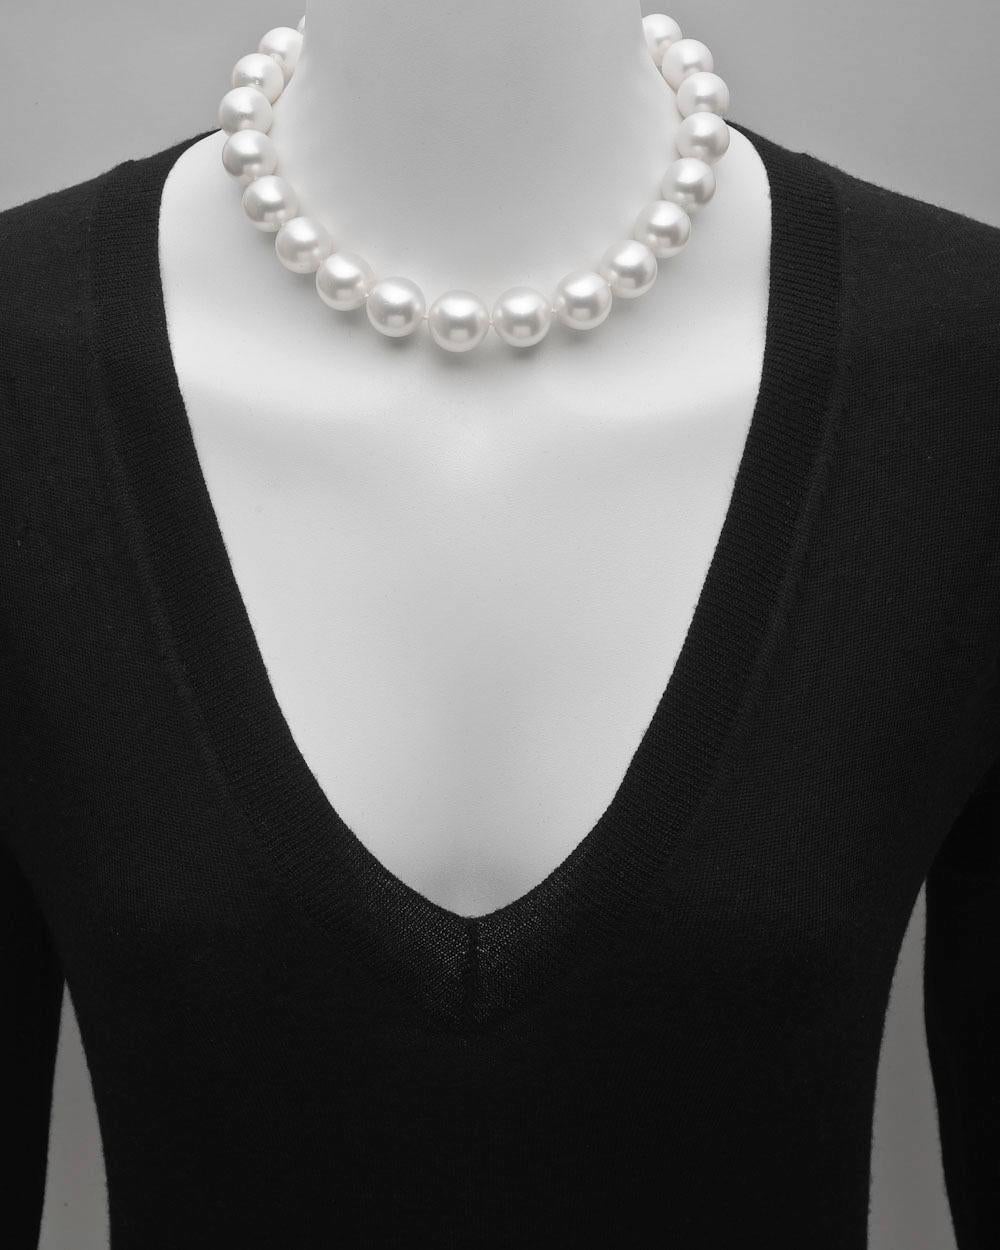 South Sea pearl necklace, composed of 25 slightly graduated South Sea cultured pearls with diameters ranging from 17.4mm to 15mm, strung on a hand-knotted silk cord, with an 'invisible' screw clasp linking the two pearls at back. 16